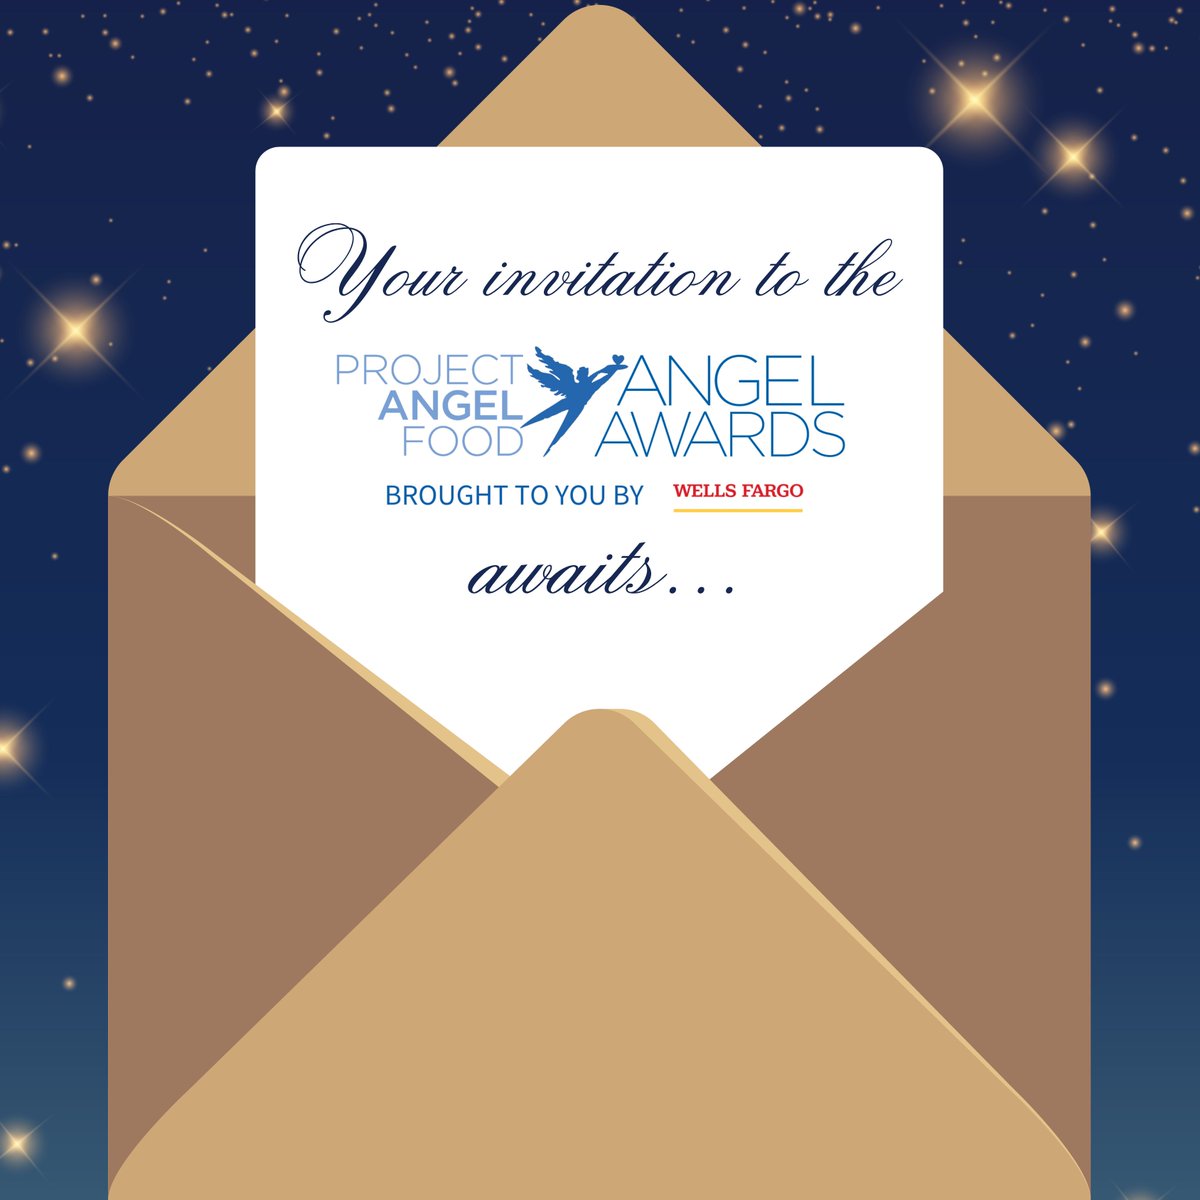 (2/2) Not in L.A.? We’re getting social and would love for you to join us. Use the hashtags #ProjectAngelFood and #AngelAwards to be a part of the celebration. 💙